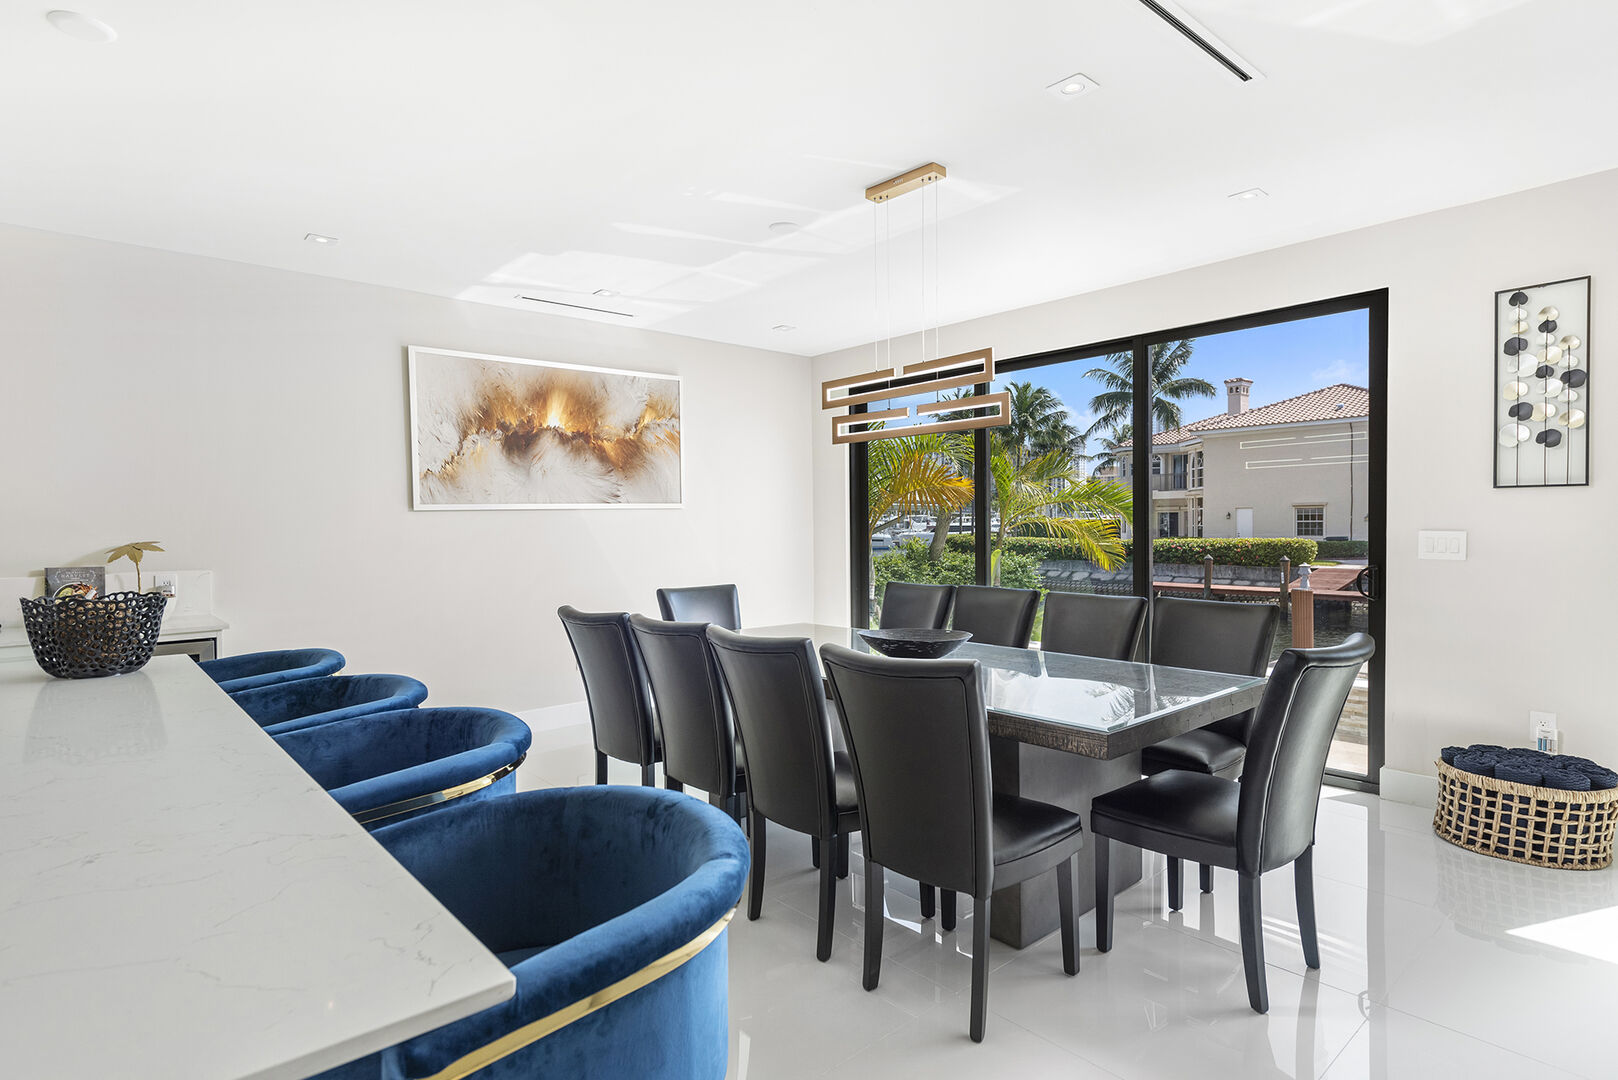 Dinning room in the ample open space living area offers canal views.